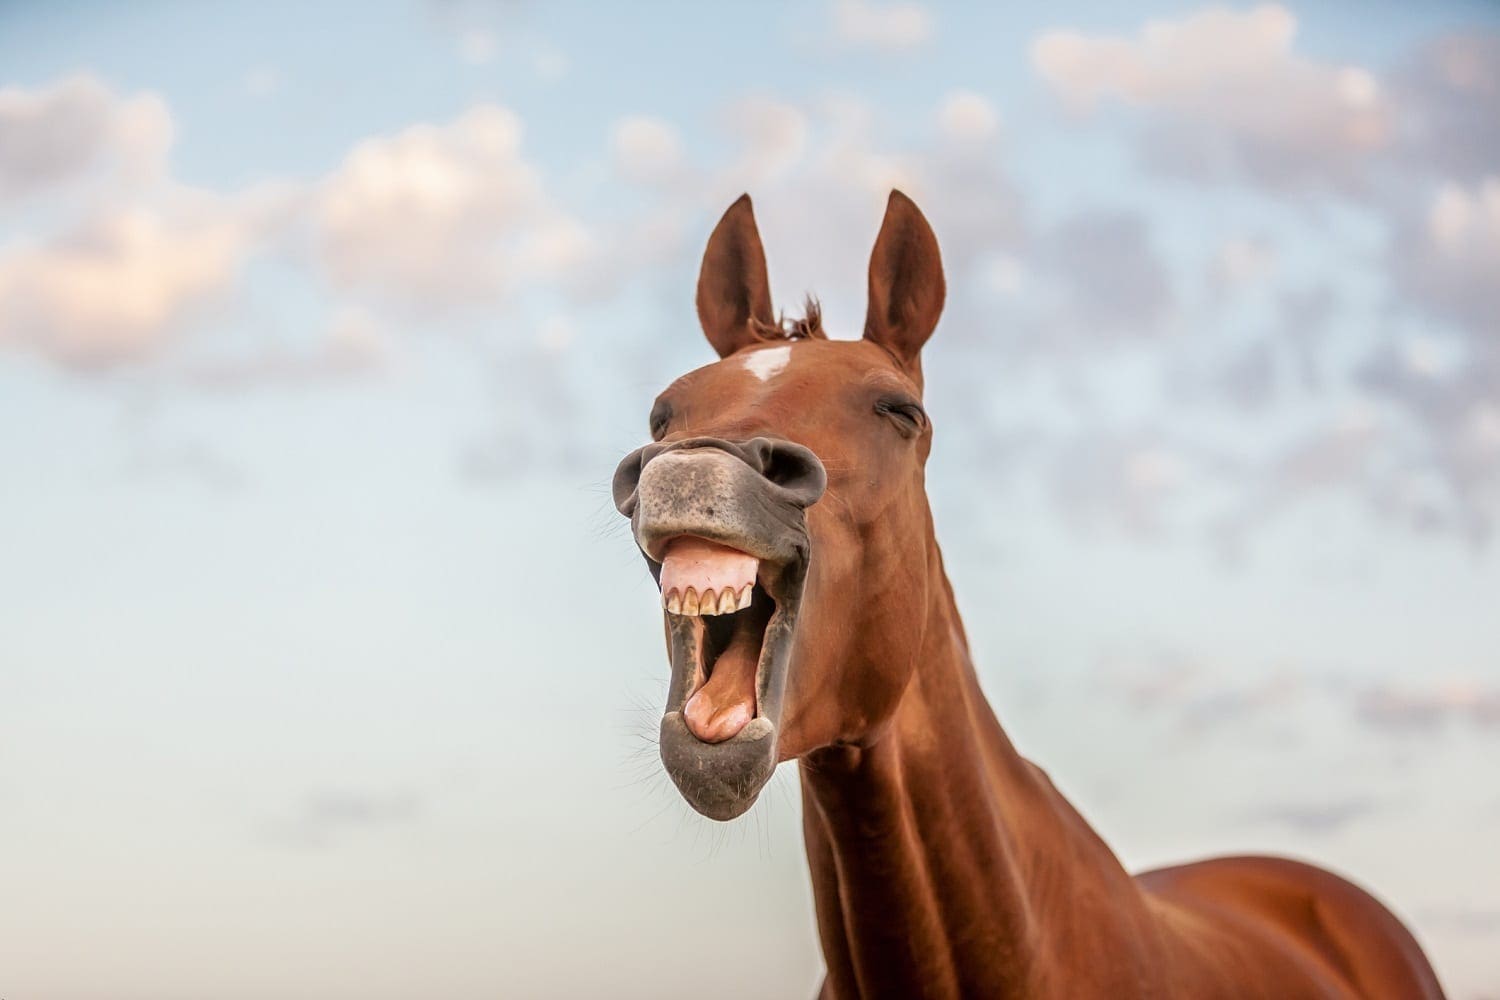 Horse 'laughing': ID 59526366 © Pat Smith | Dreamstime.com